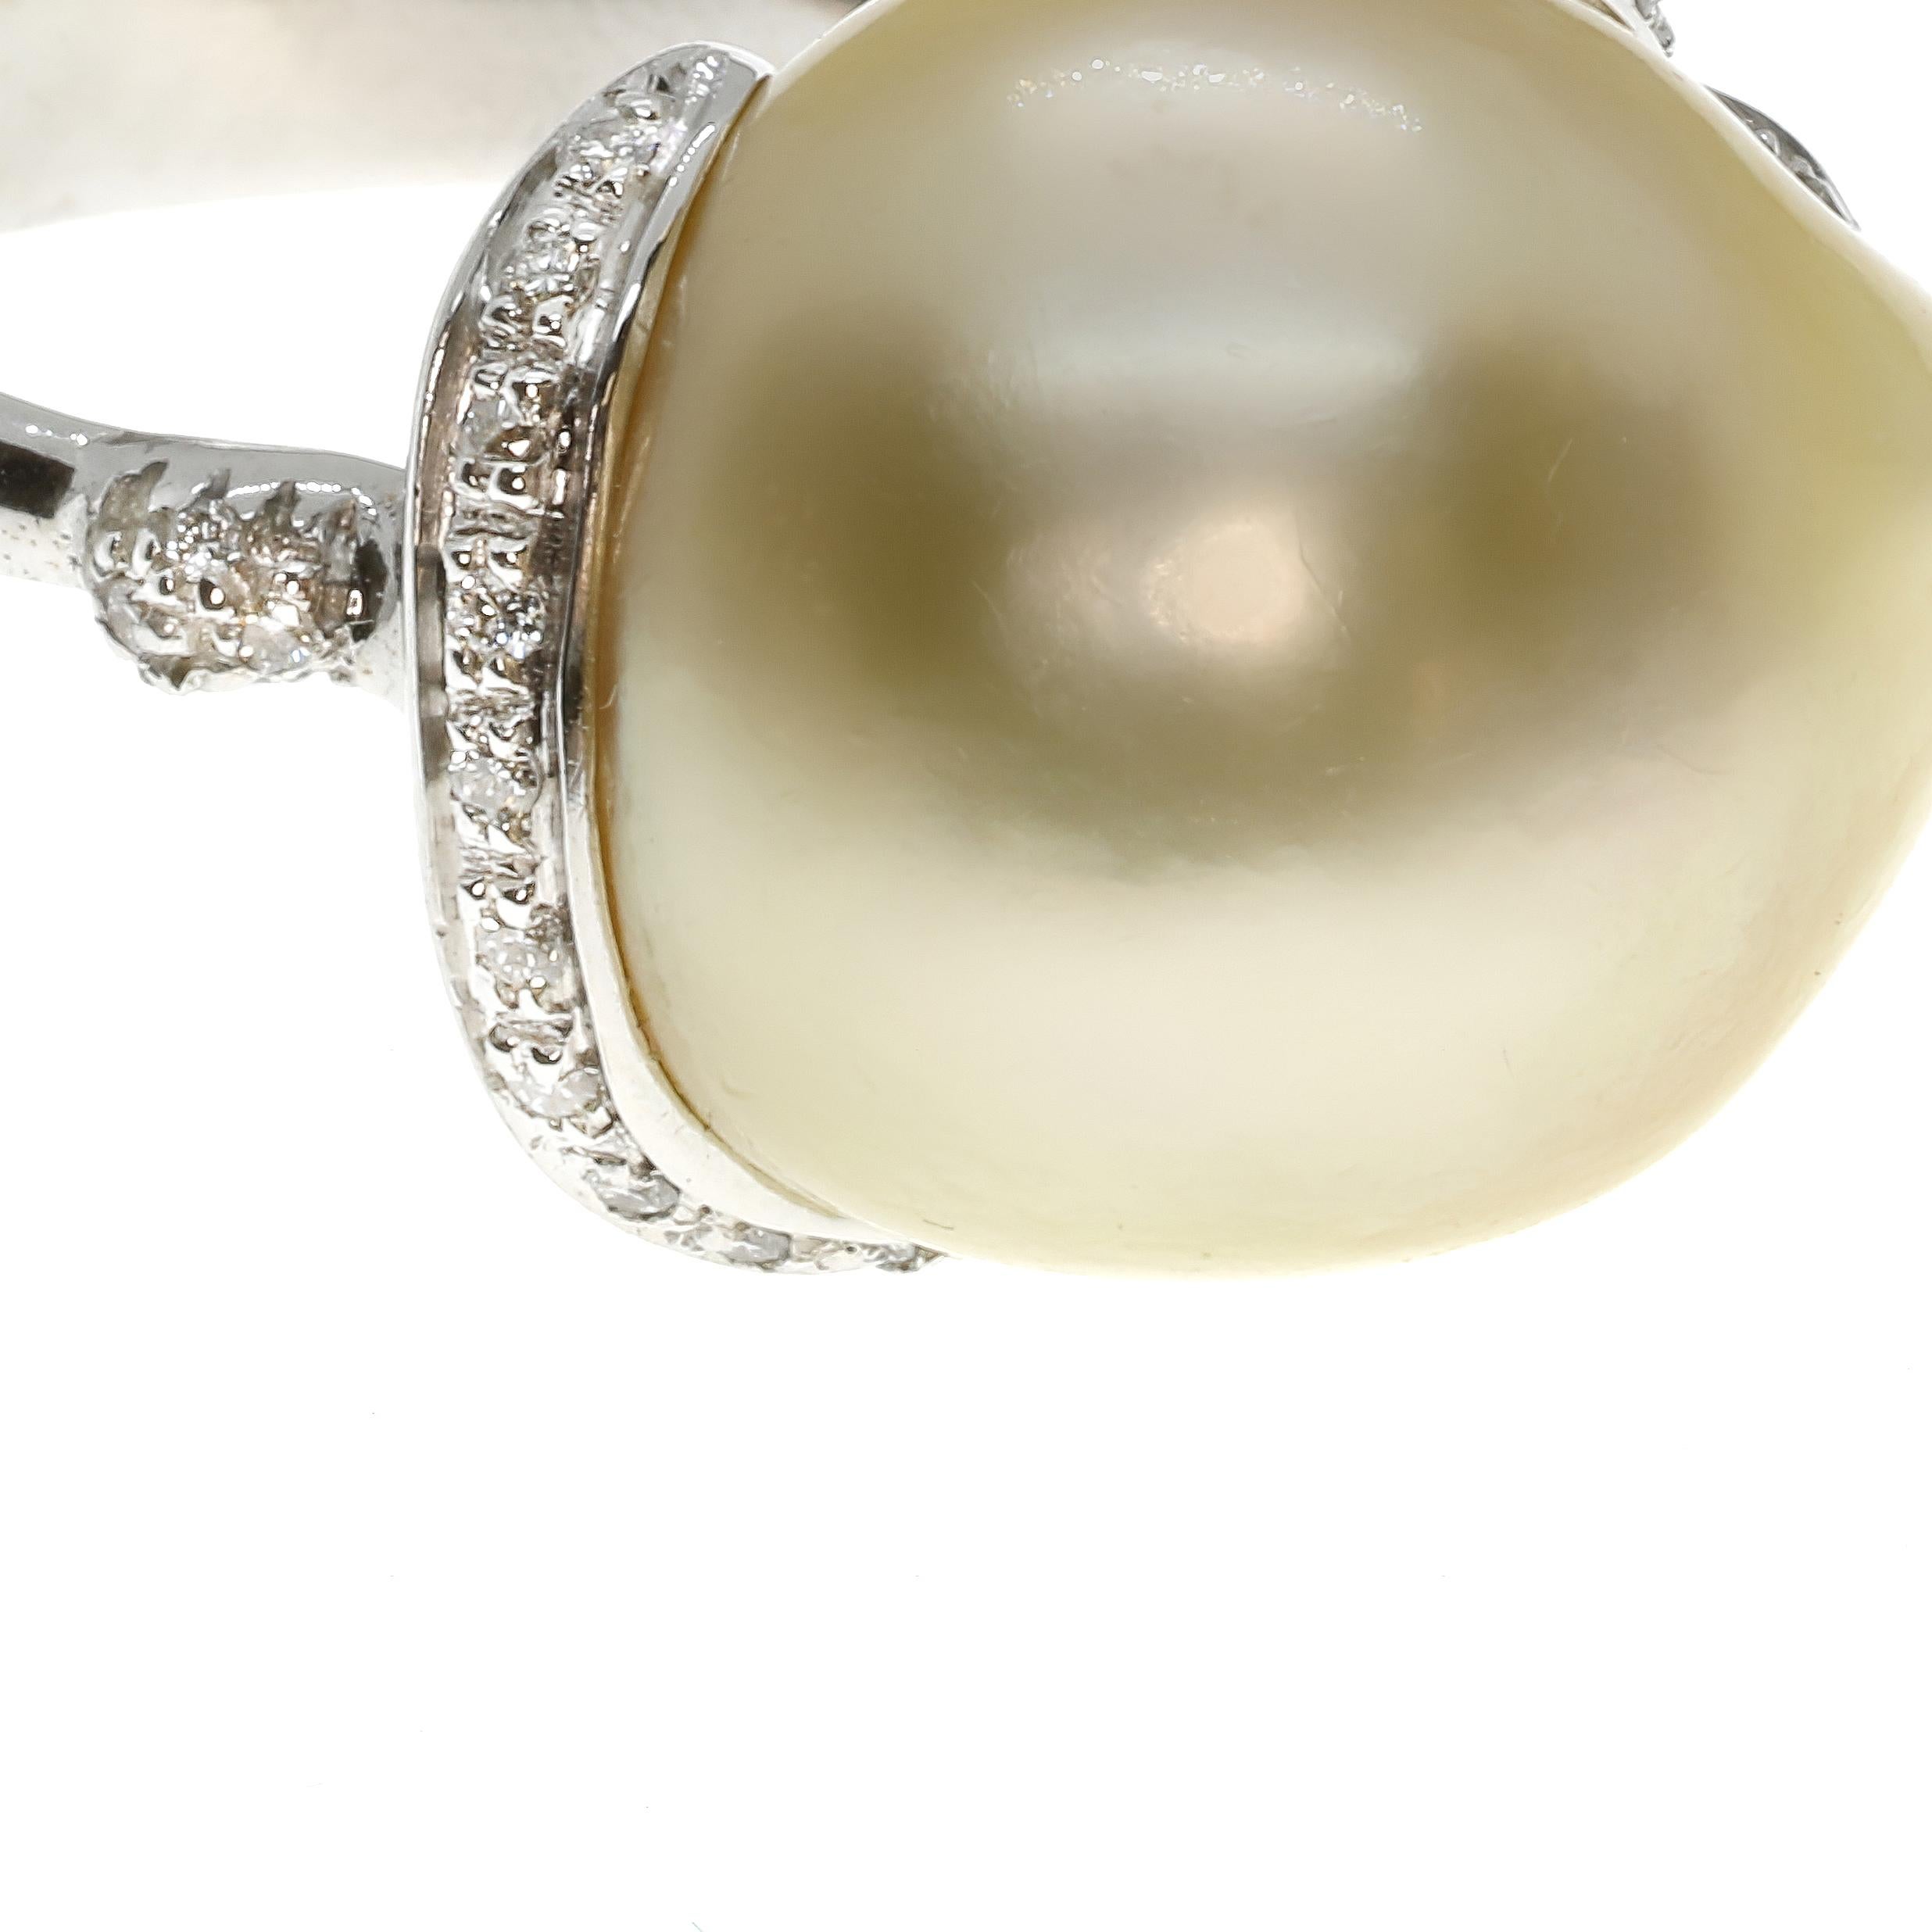 This gorgeous asymmetrical cocktail ring features a luminous 31-carat Australian pearl framed with white diamonds and set in 18-karat white gold. Hand-made using traditional methods, this singular piece has been designed and produced in Palermo,